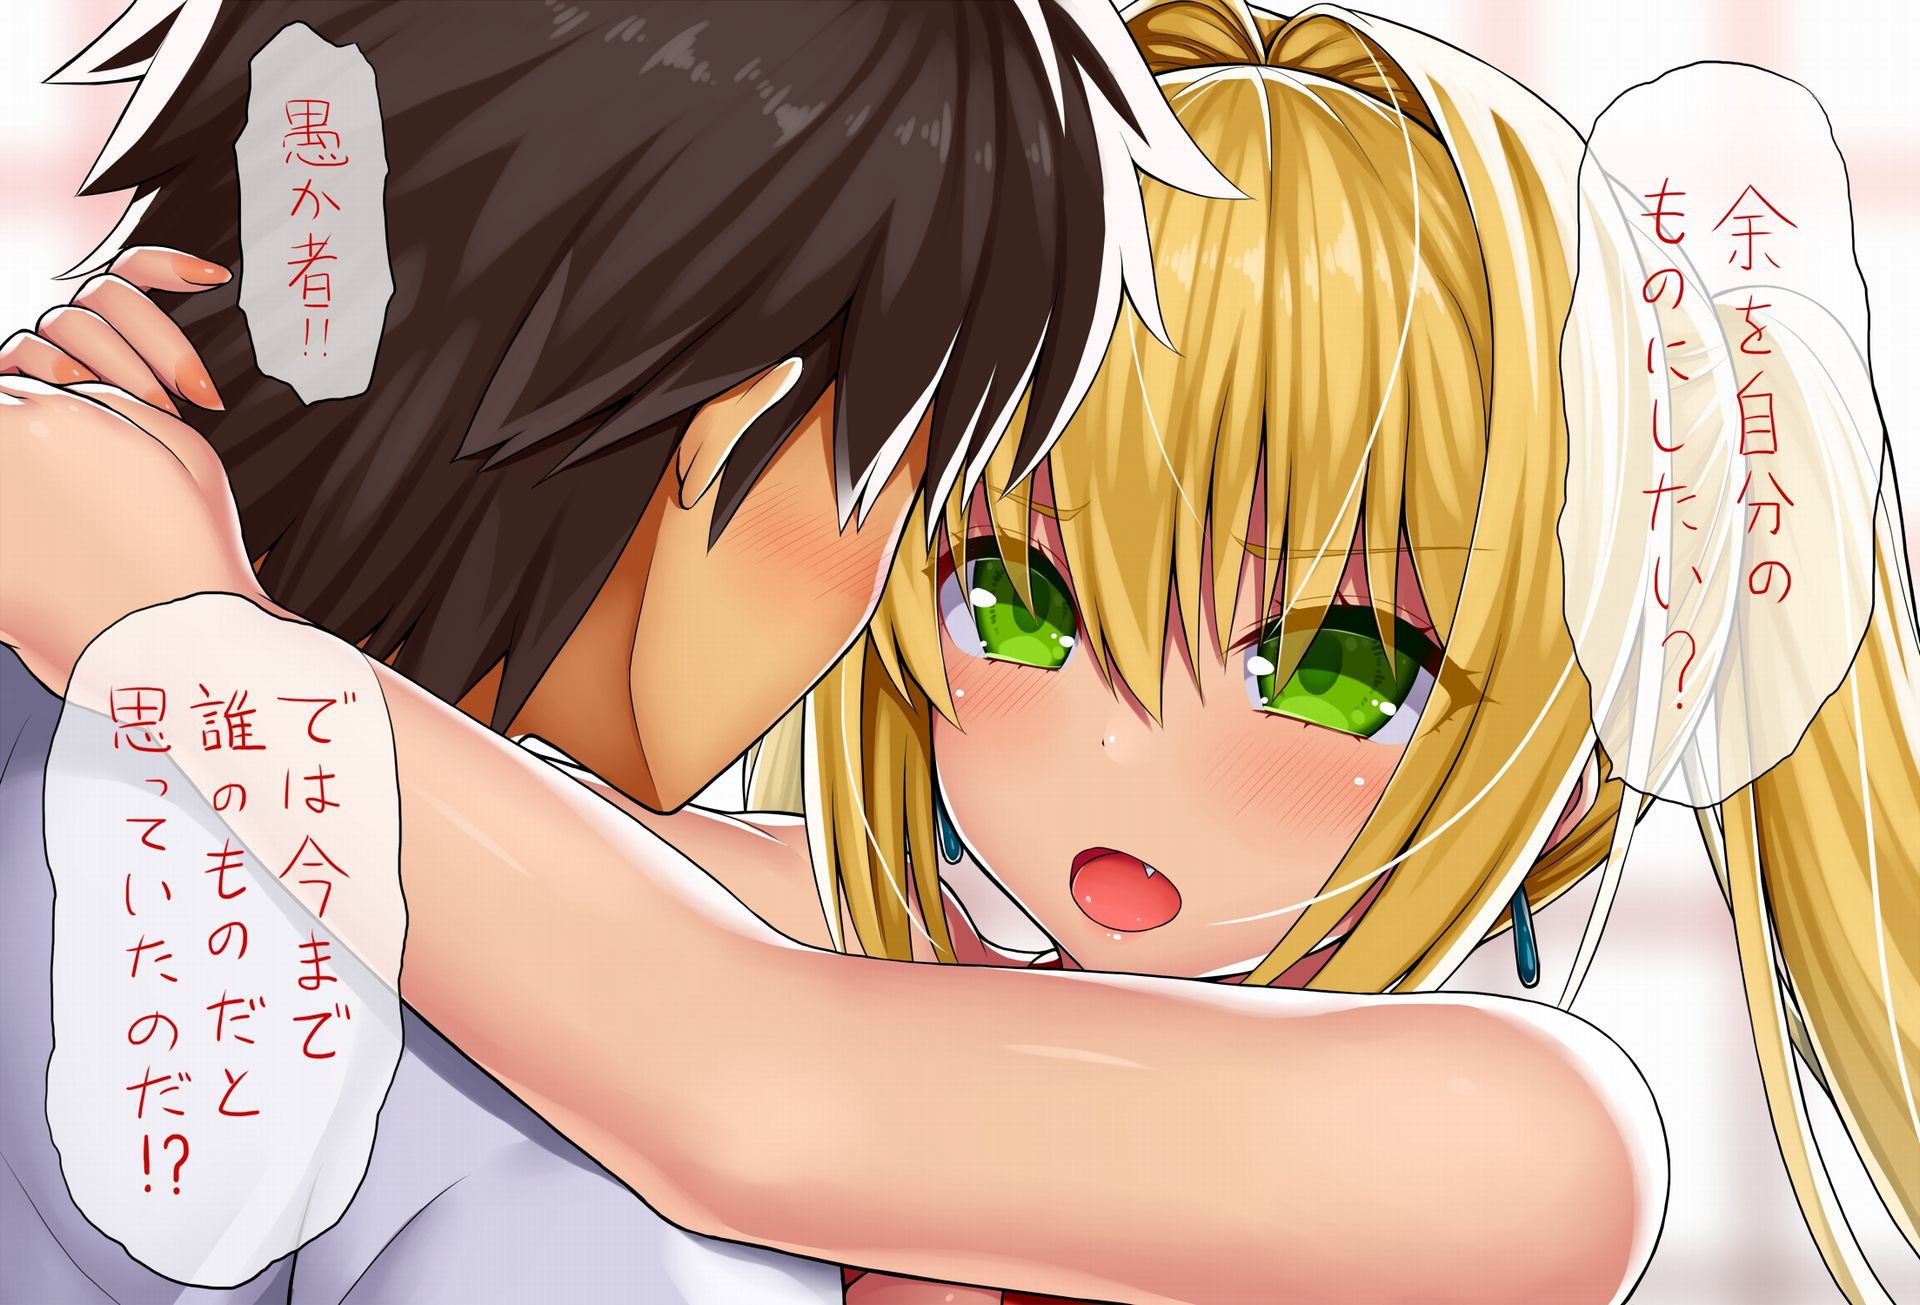 [Secondary ZIP] is about to start anime 100 pieces of cute image summary of Nero Claudius so soon 53